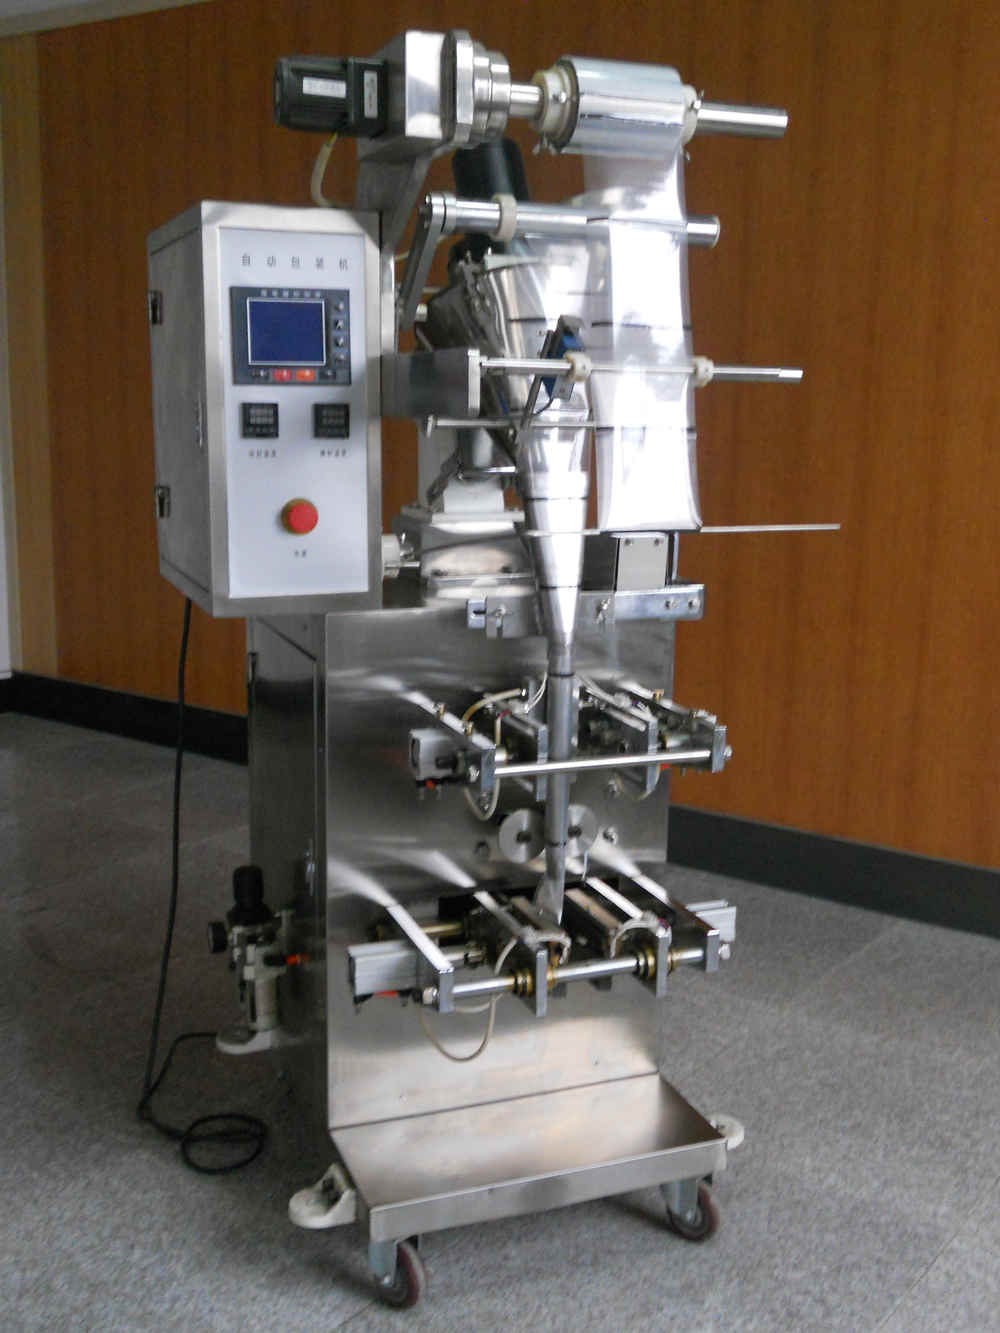 Particle automatic packaging machine: a revolutionary of production efficiency